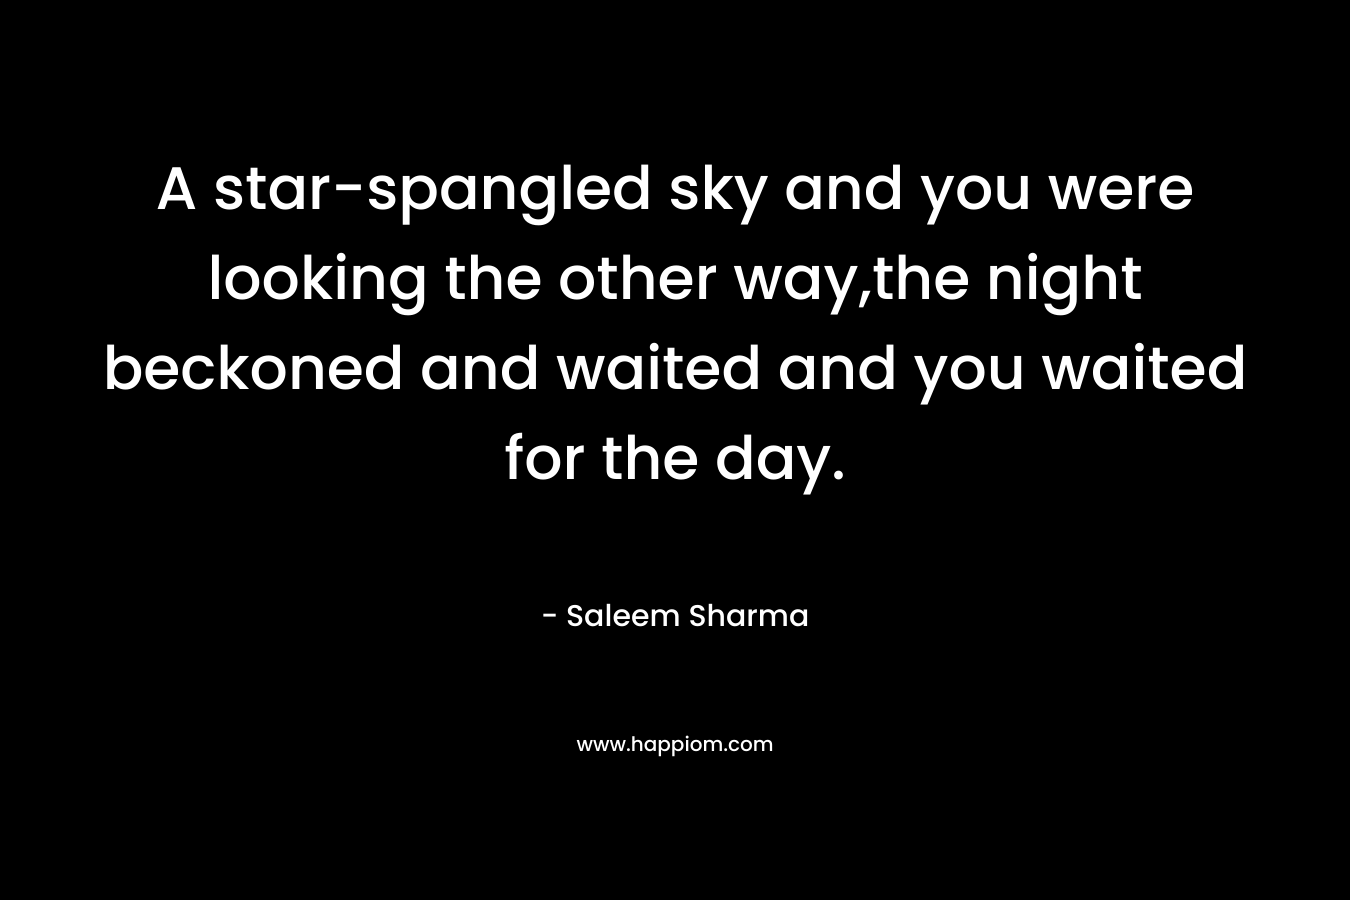 A star-spangled sky and you were looking the other way,the night beckoned and waited and you waited for the day. – Saleem Sharma